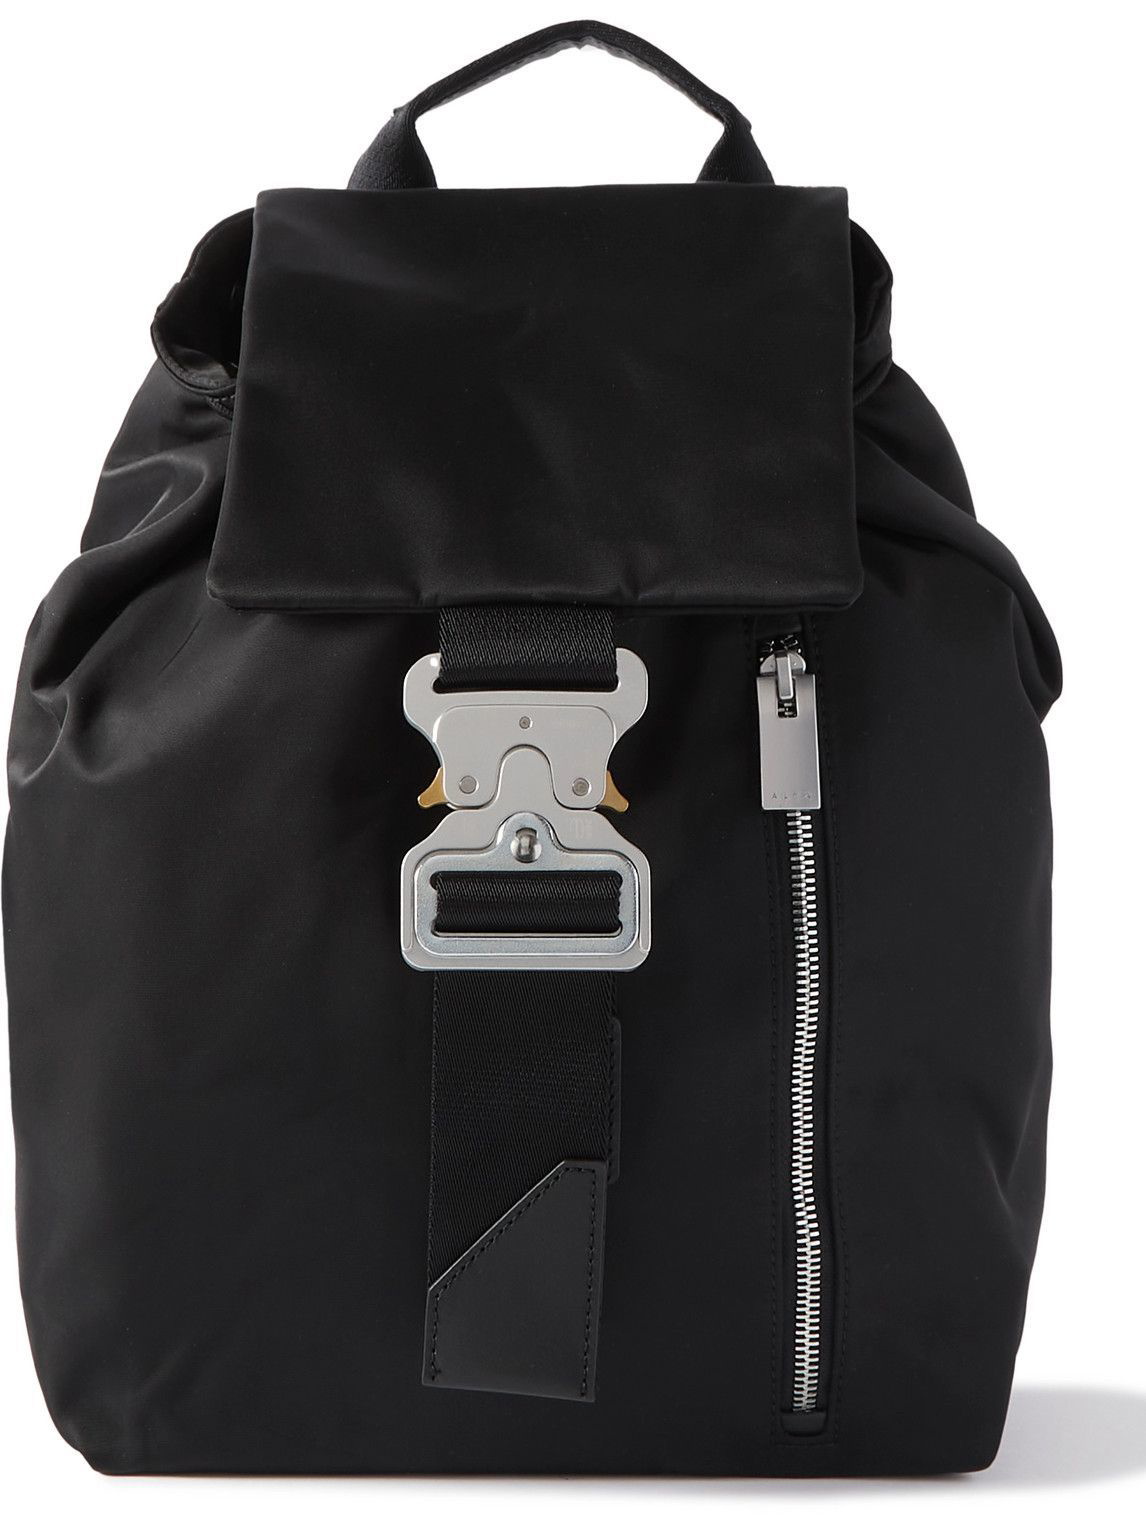 1017 ALYX 9SM - Leather-Trimmed Recycled Nylon Backpack 1017 ALYX 9SM